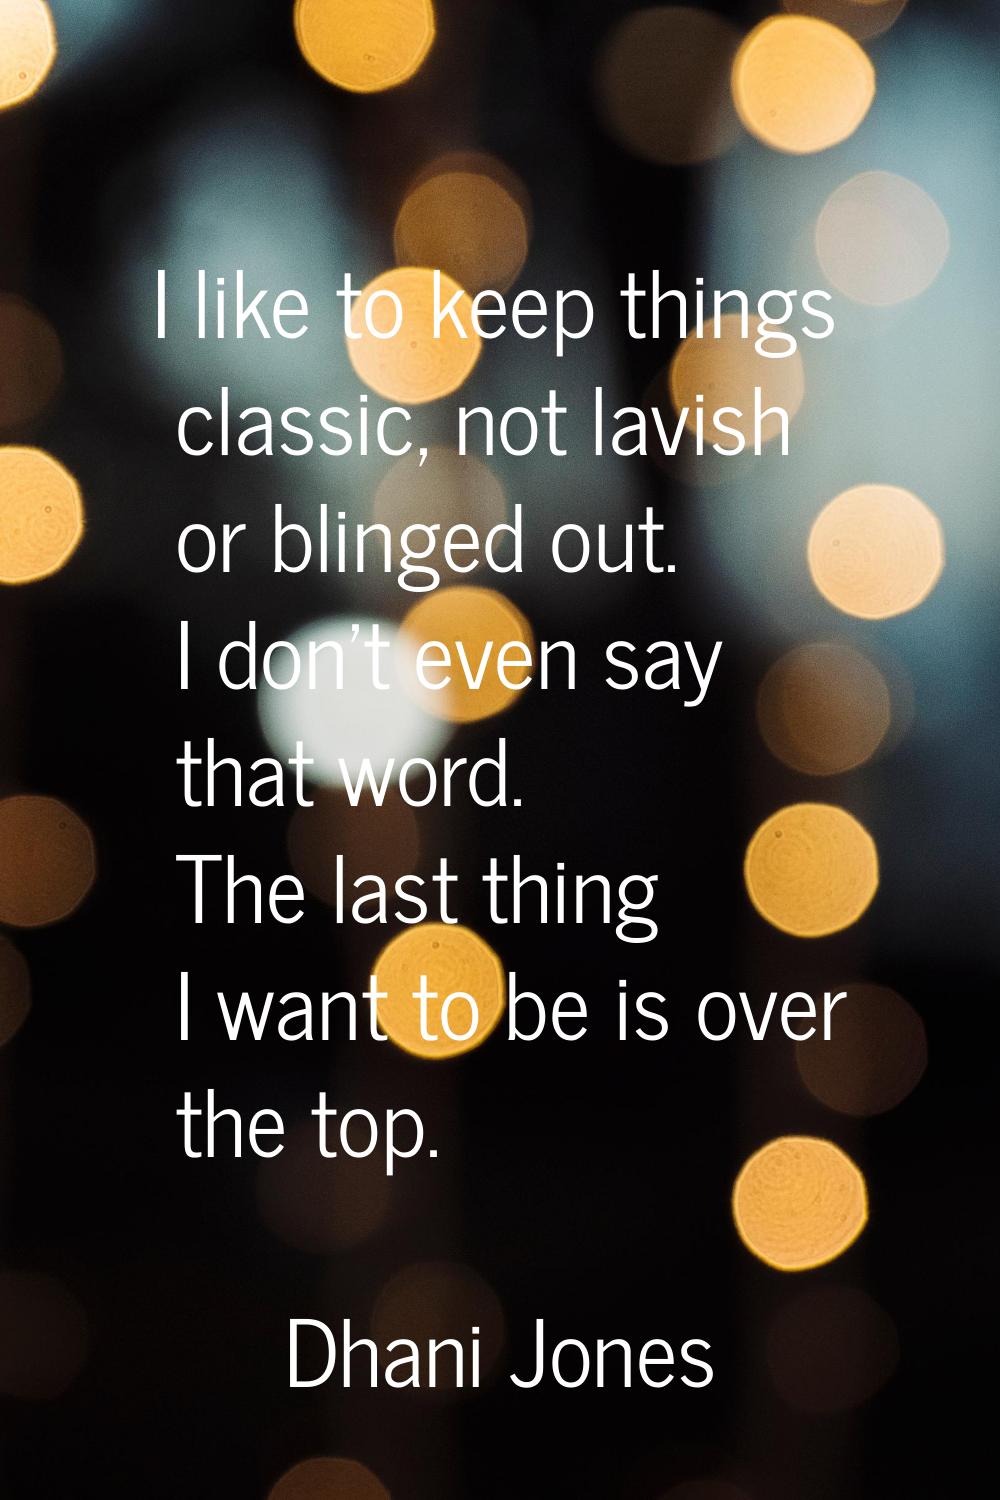 I like to keep things classic, not lavish or blinged out. I don't even say that word. The last thin